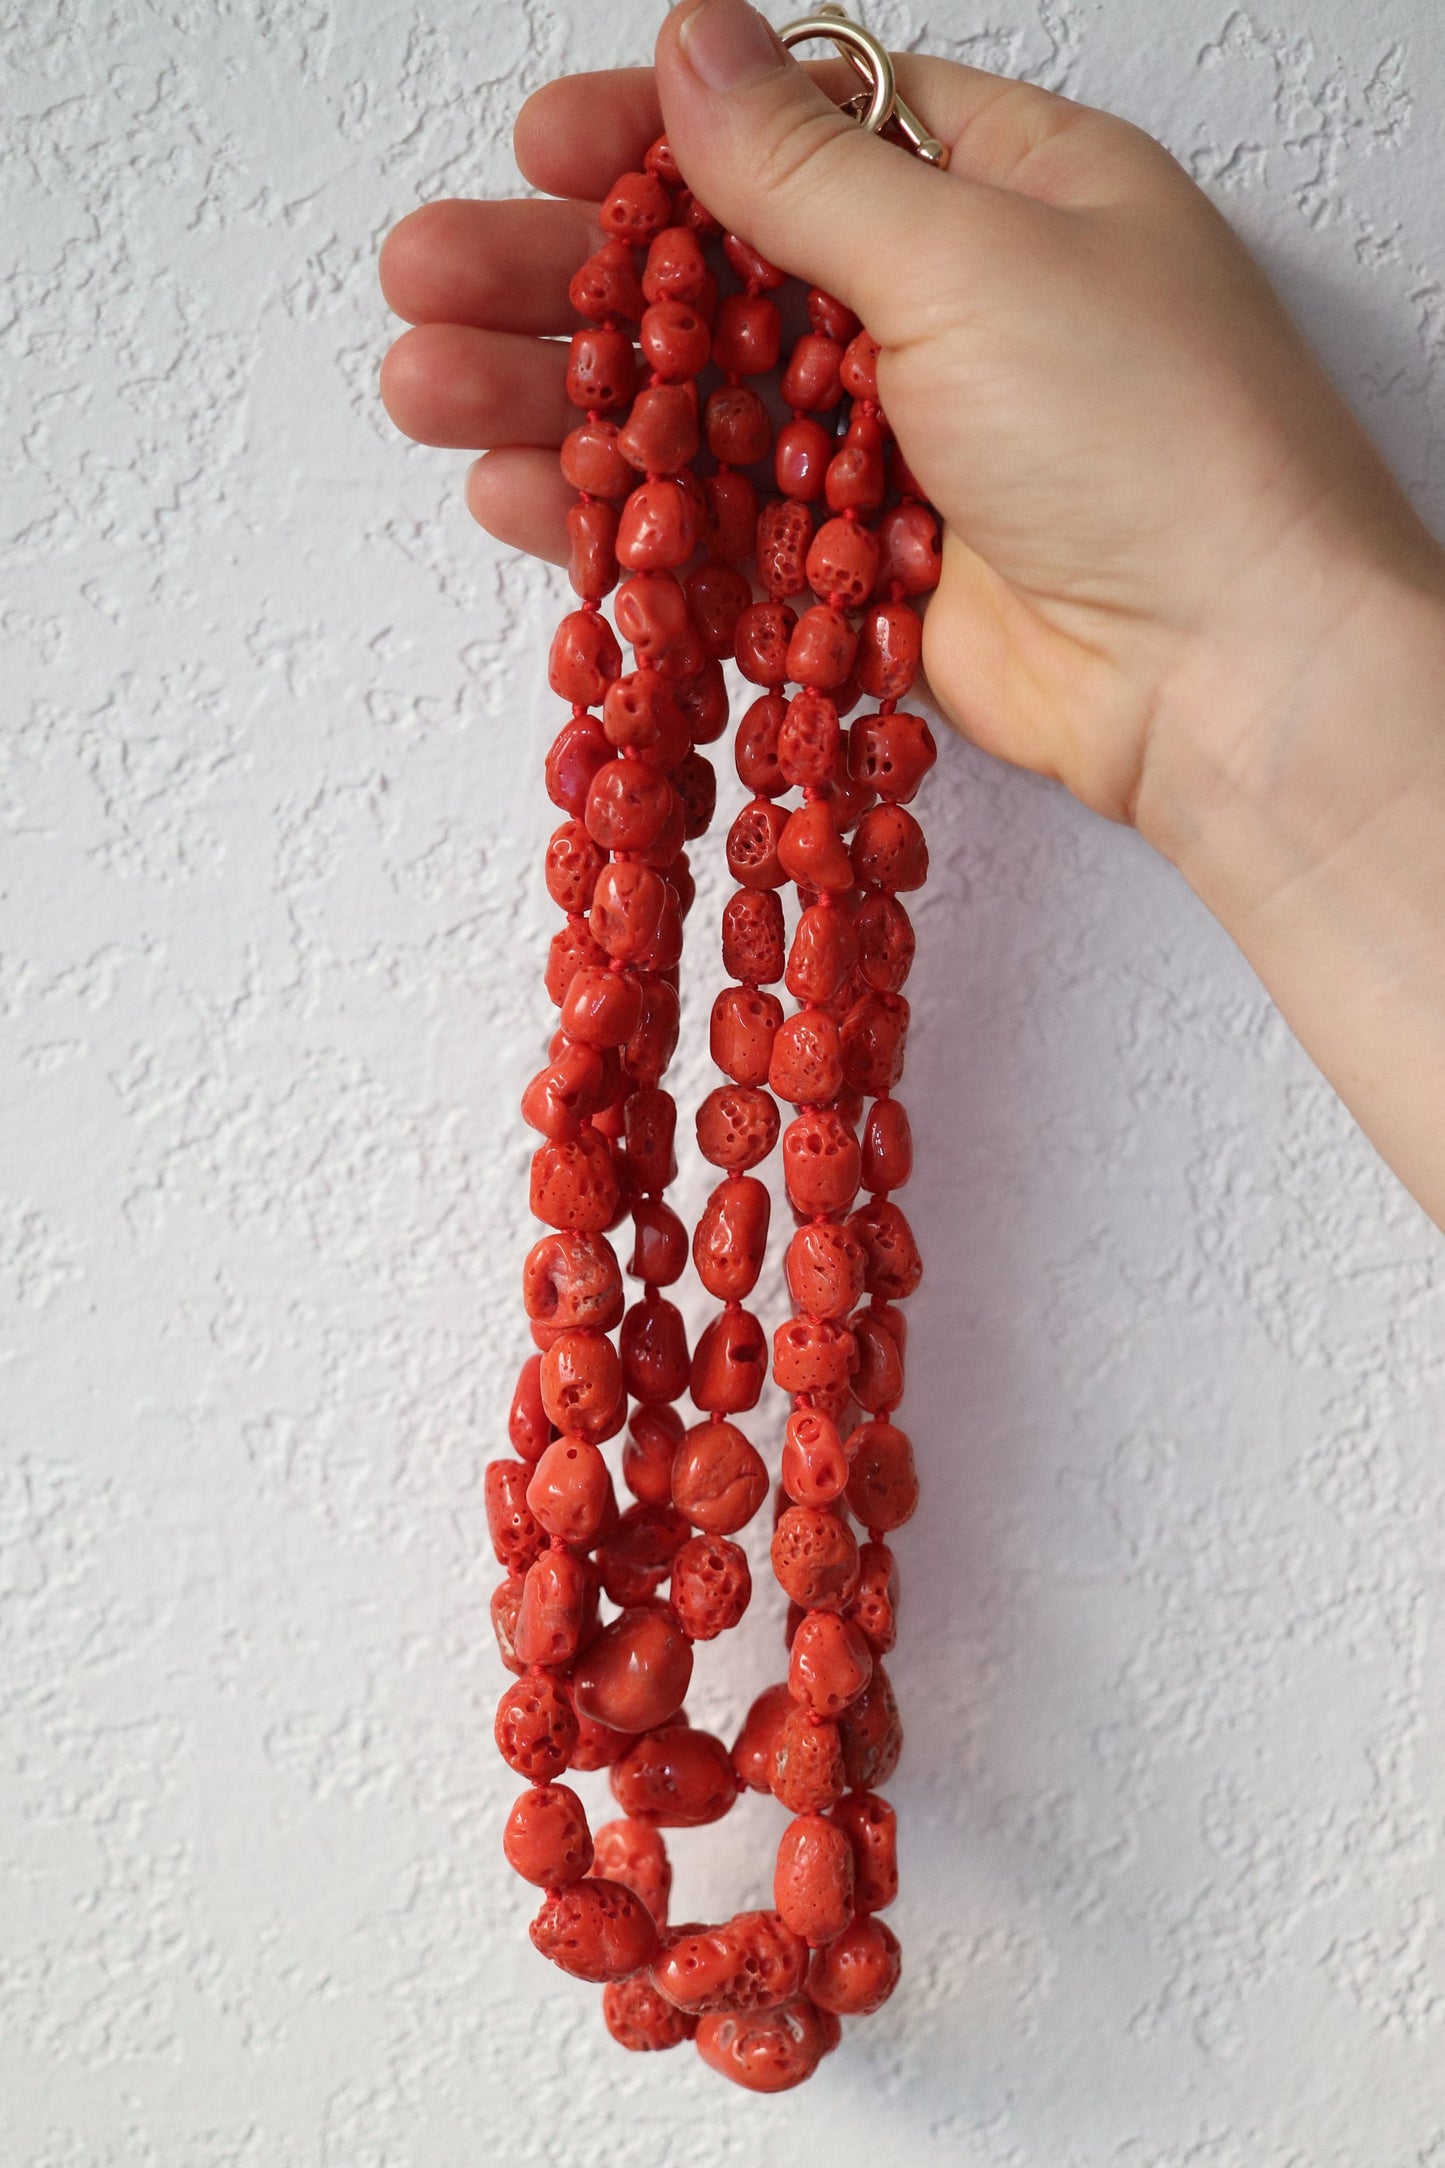 14k Coral Bead Necklace. Multi-Strand Raw Coral beads. High Quality Coral Natural Coral Necklace st(48)